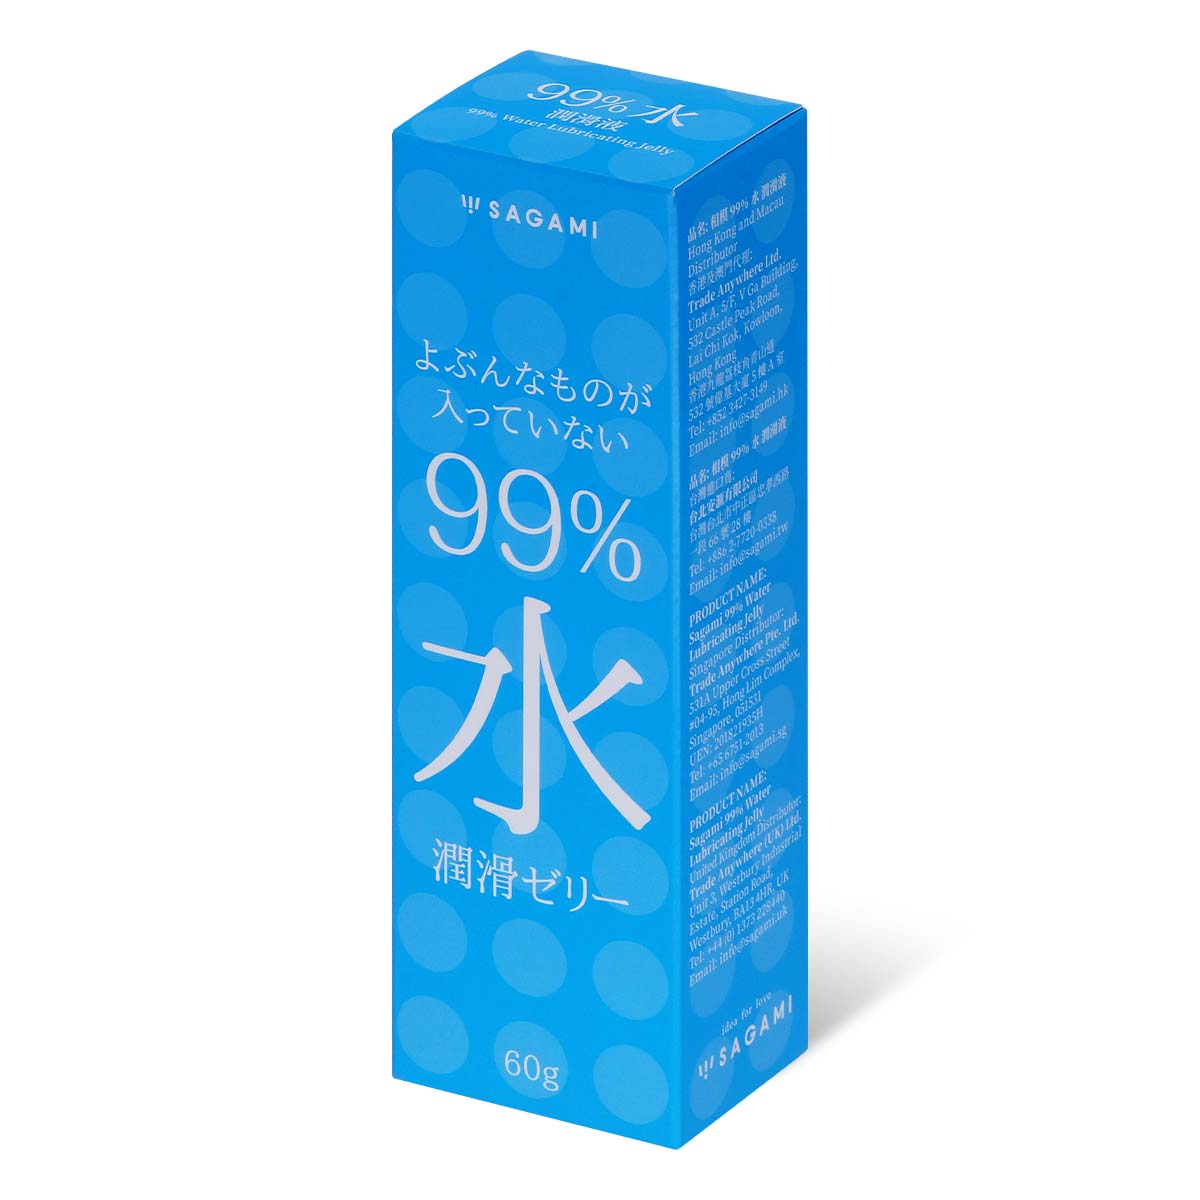 Sagami 99% Water Lubricating Jelly 60g Water-based Lubricant-thumb_1